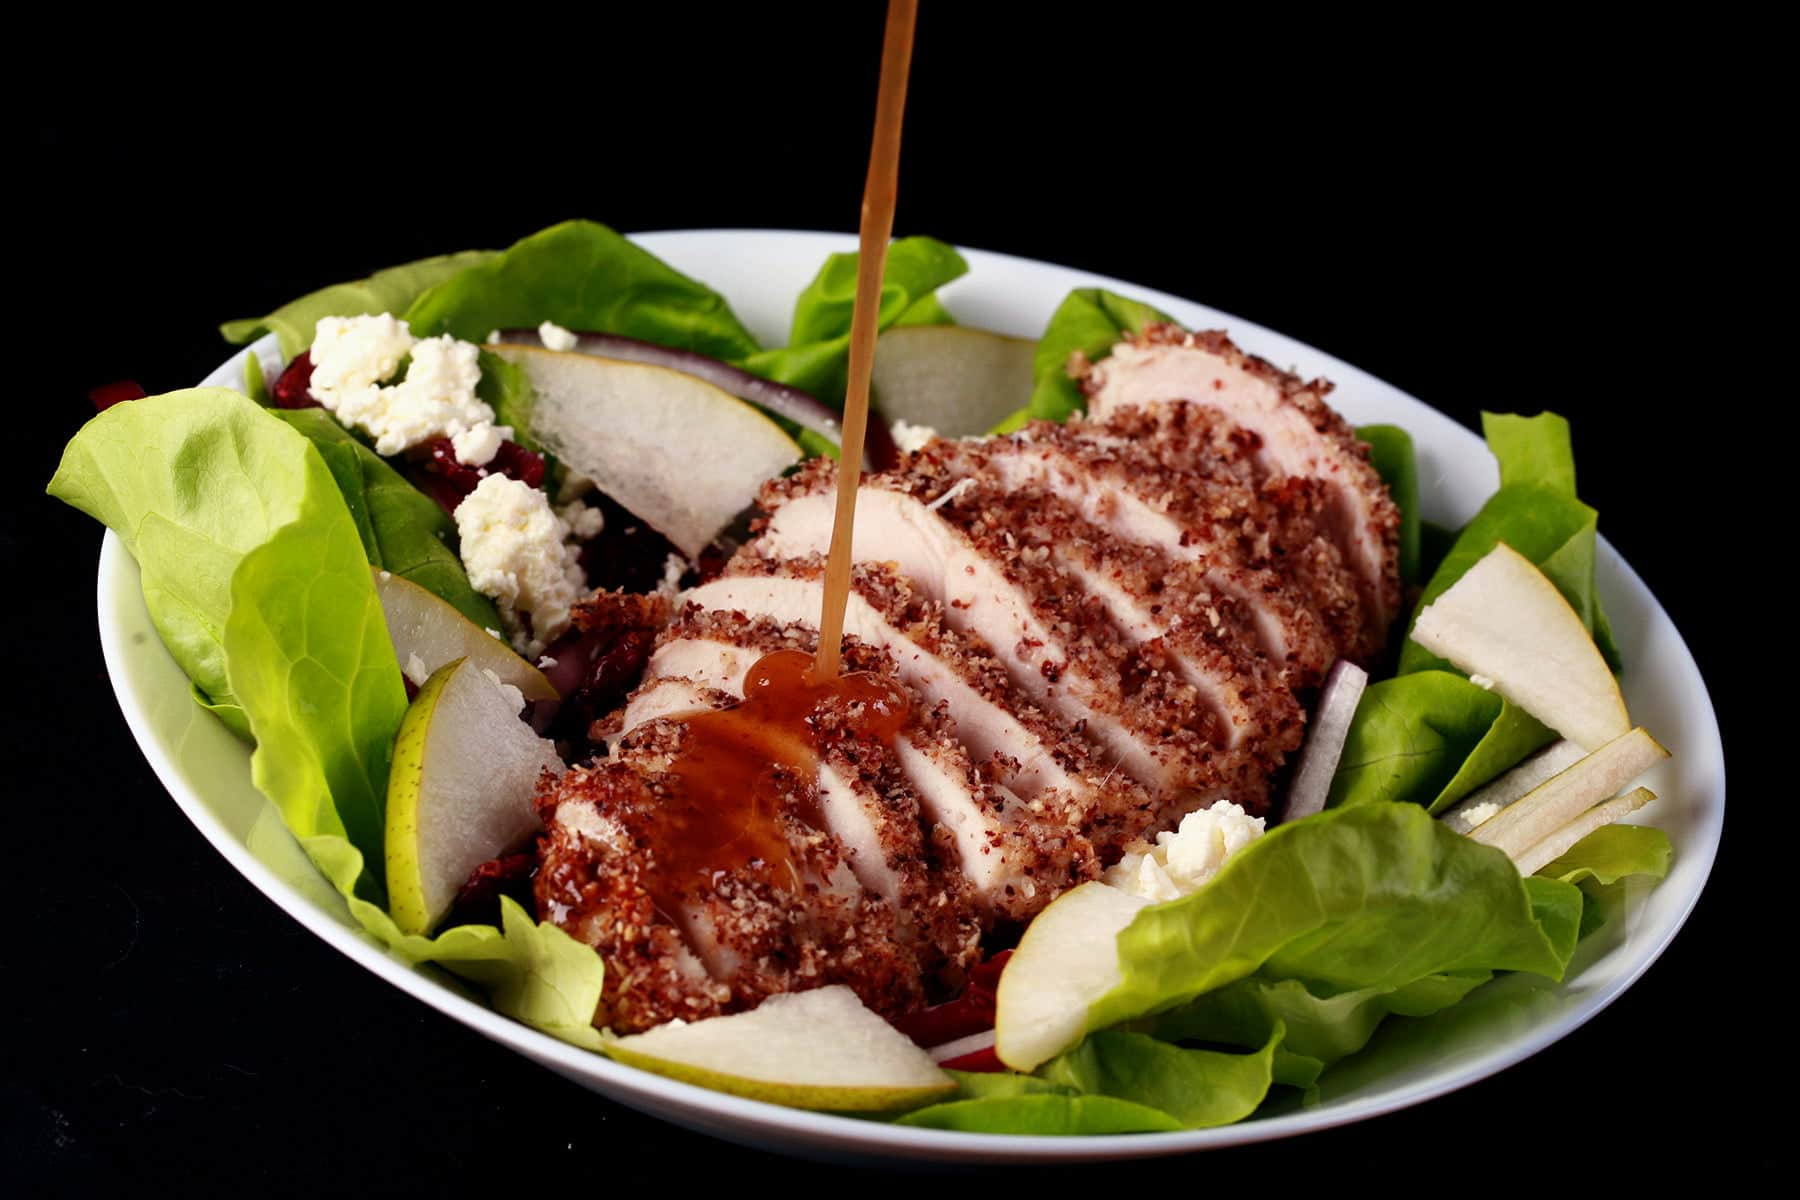 A sliced hazelnut crusted chicken breast sits a top a salad of greens, pear slices, dried cranberries, red onion slices, and feta. A golden brown balsamic vinaigrette is being poured across the chicken.